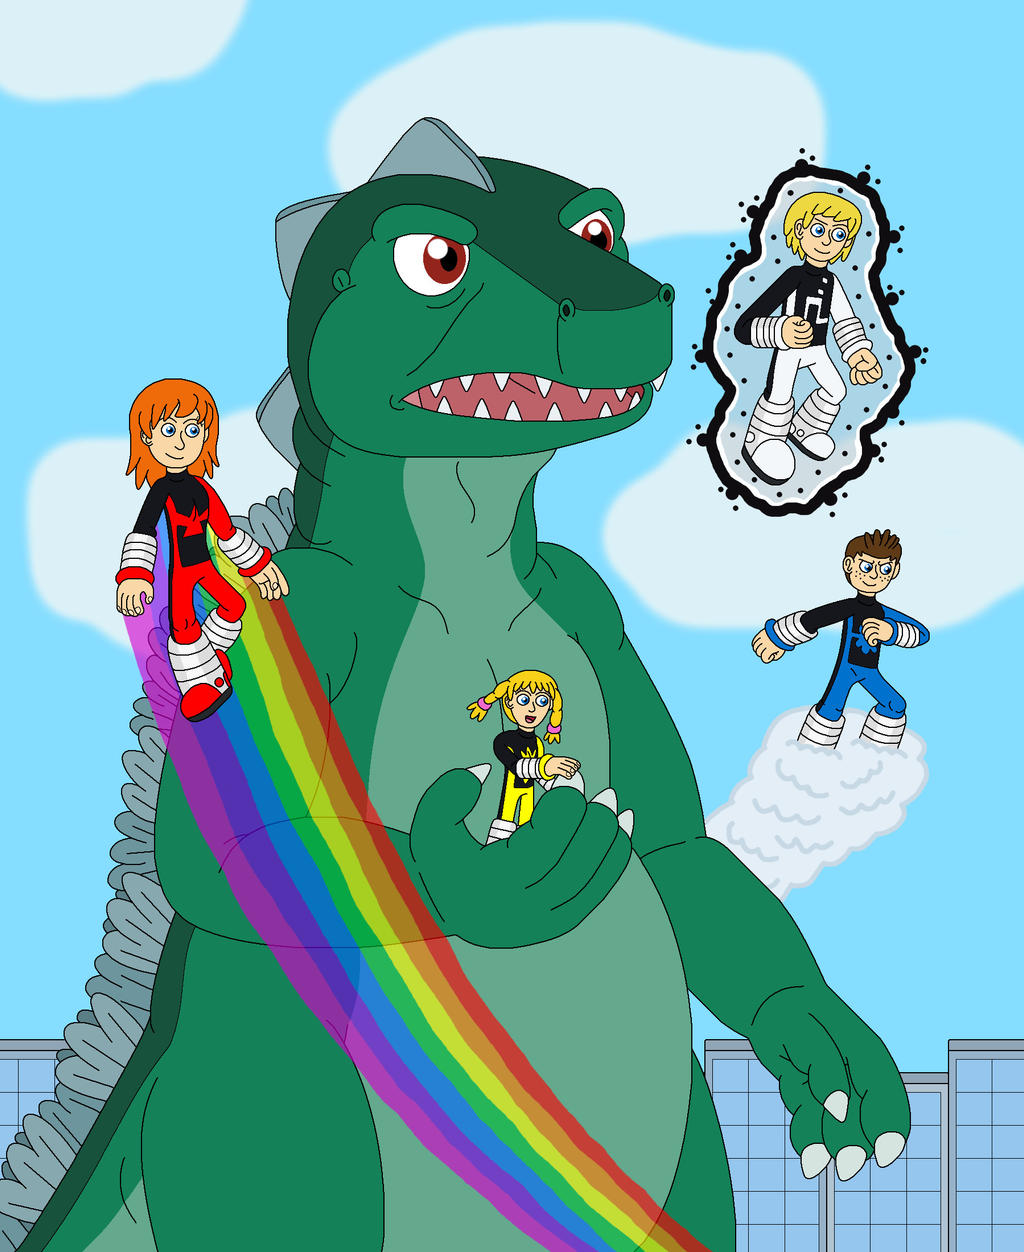 Power Pack and their new friend Godzilla